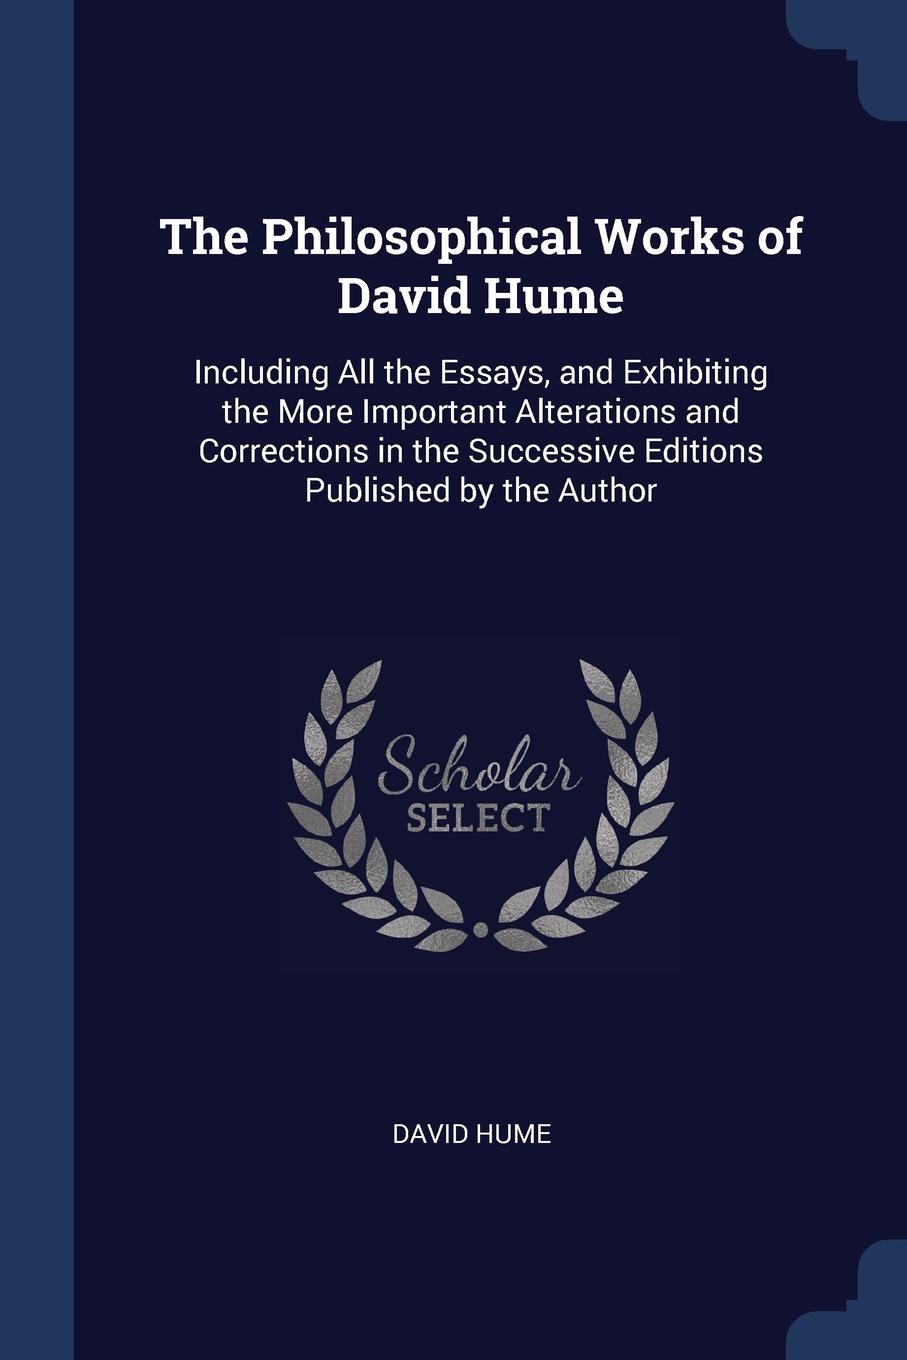 The Philosophical Works of David Hume. Including All the Essays, and Exhibiting the More Important Alterations and Corrections in the Successive Editions Published by the Author